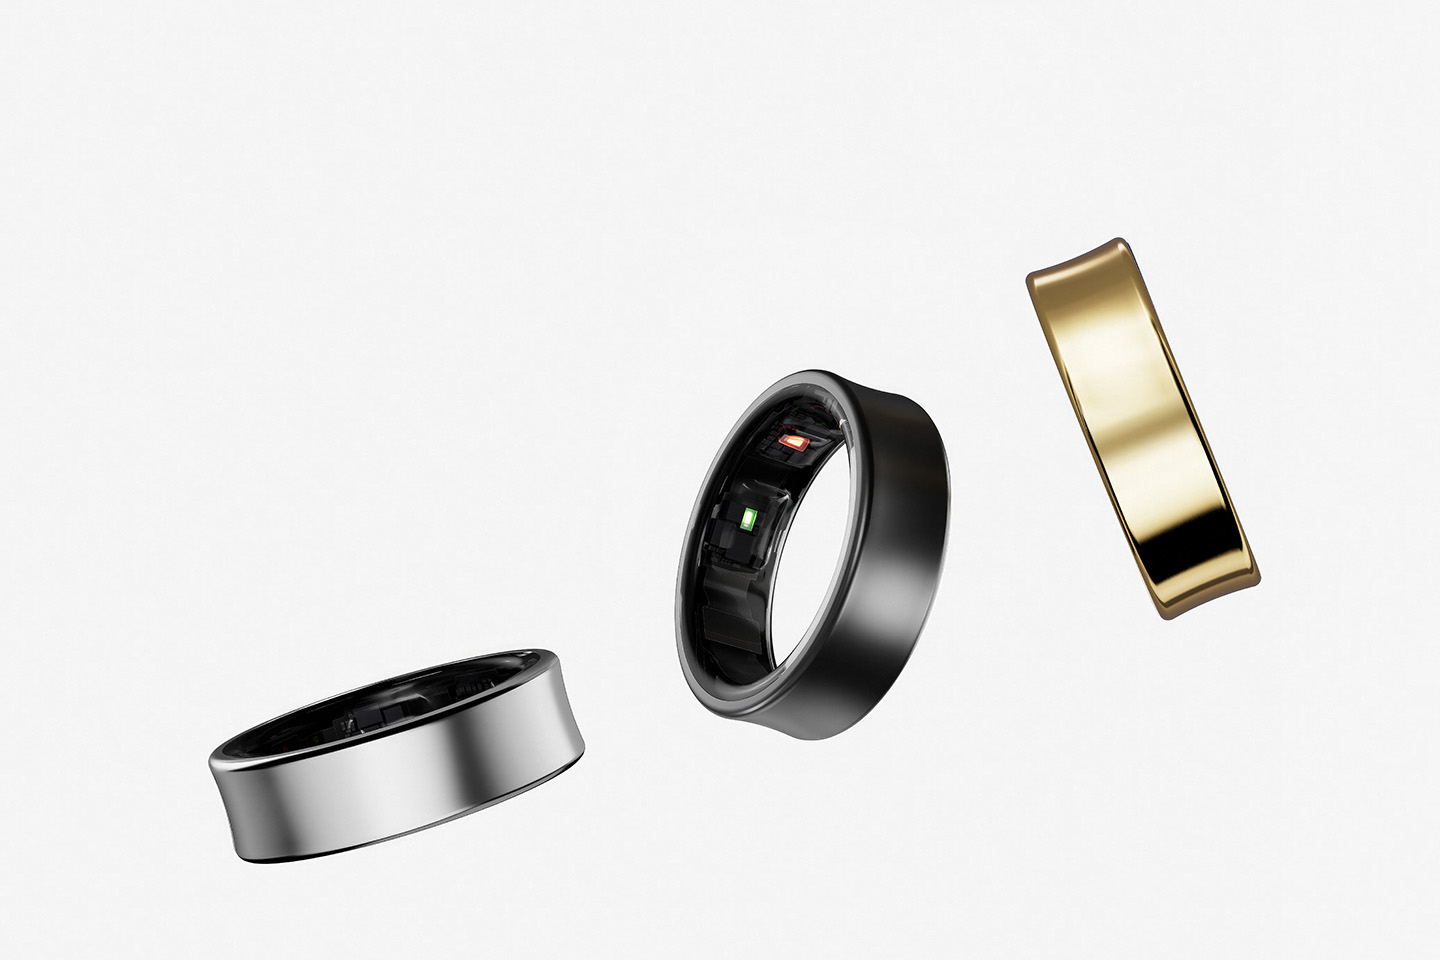 Samsung’s Galaxy Ring, its first smart ring, arrives July 24 for $399